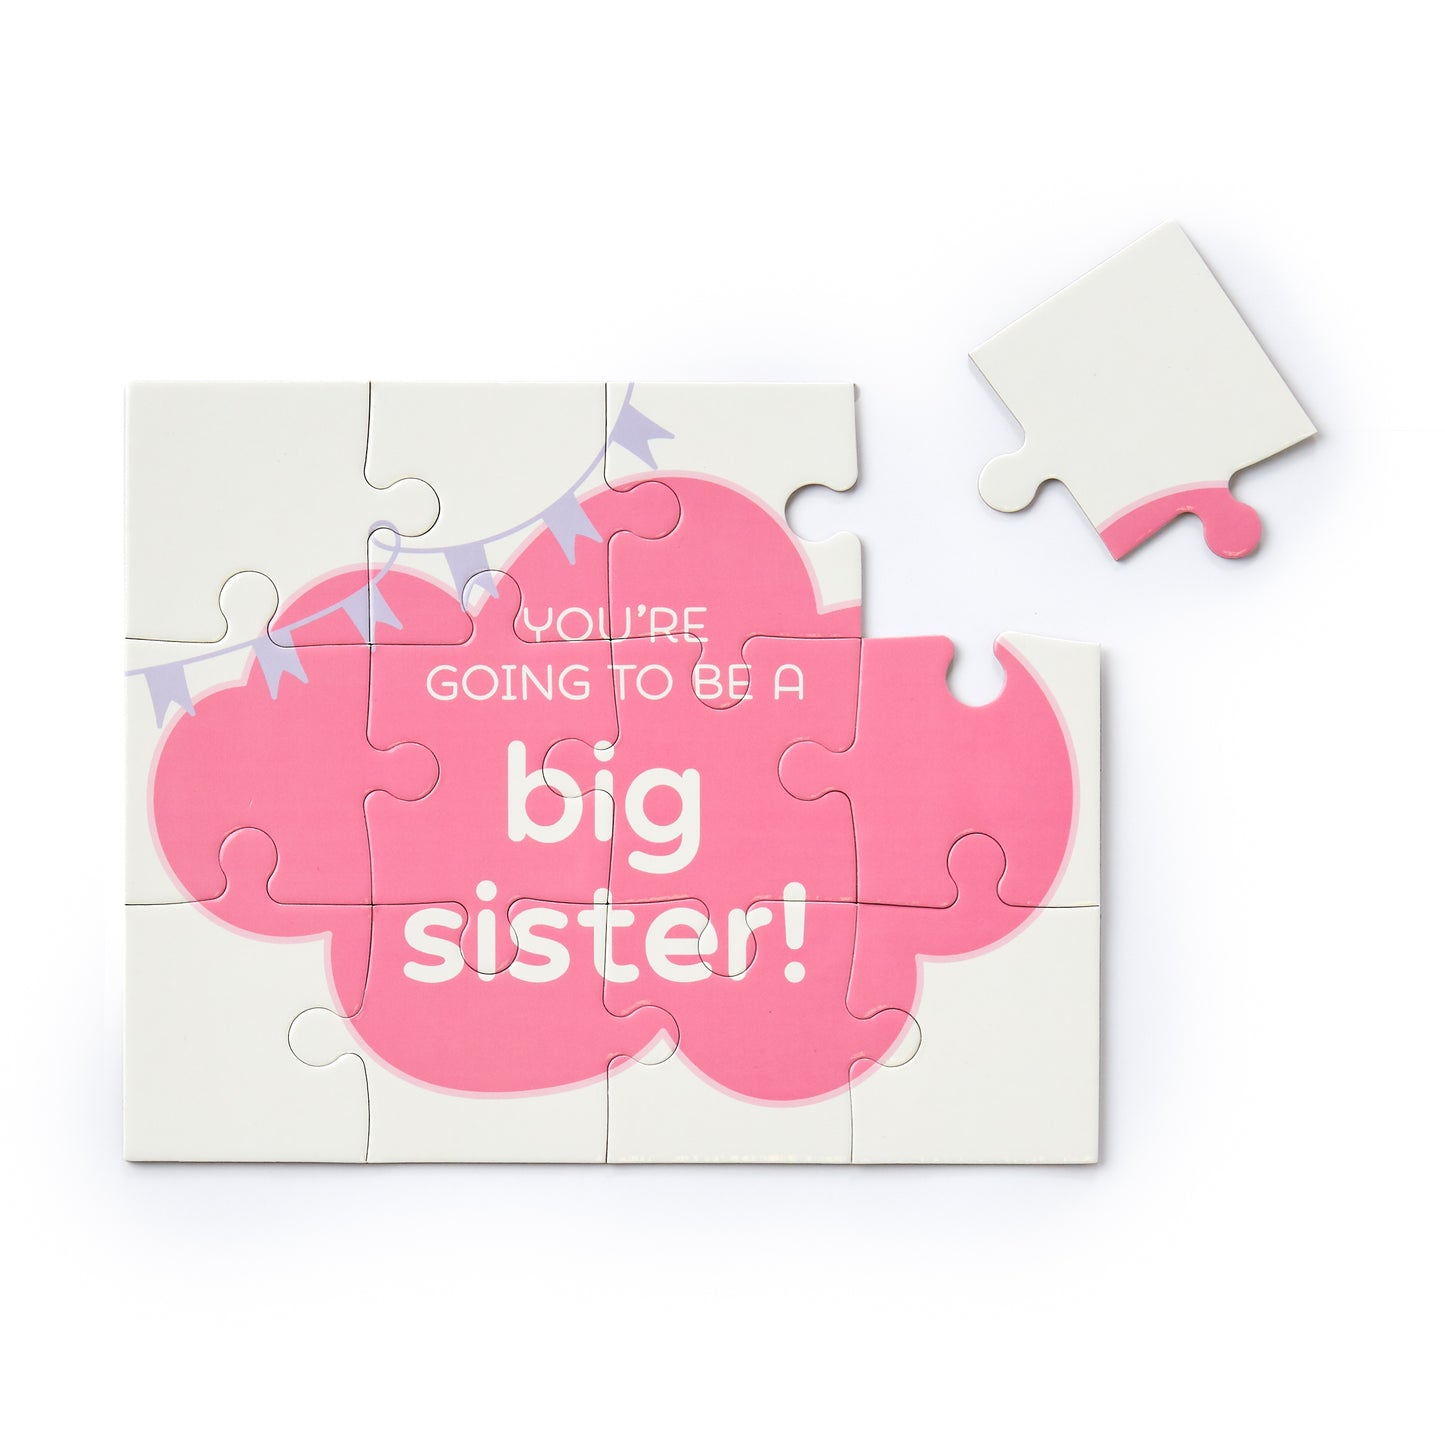 You're Going to be a Big Sister Puzzle!